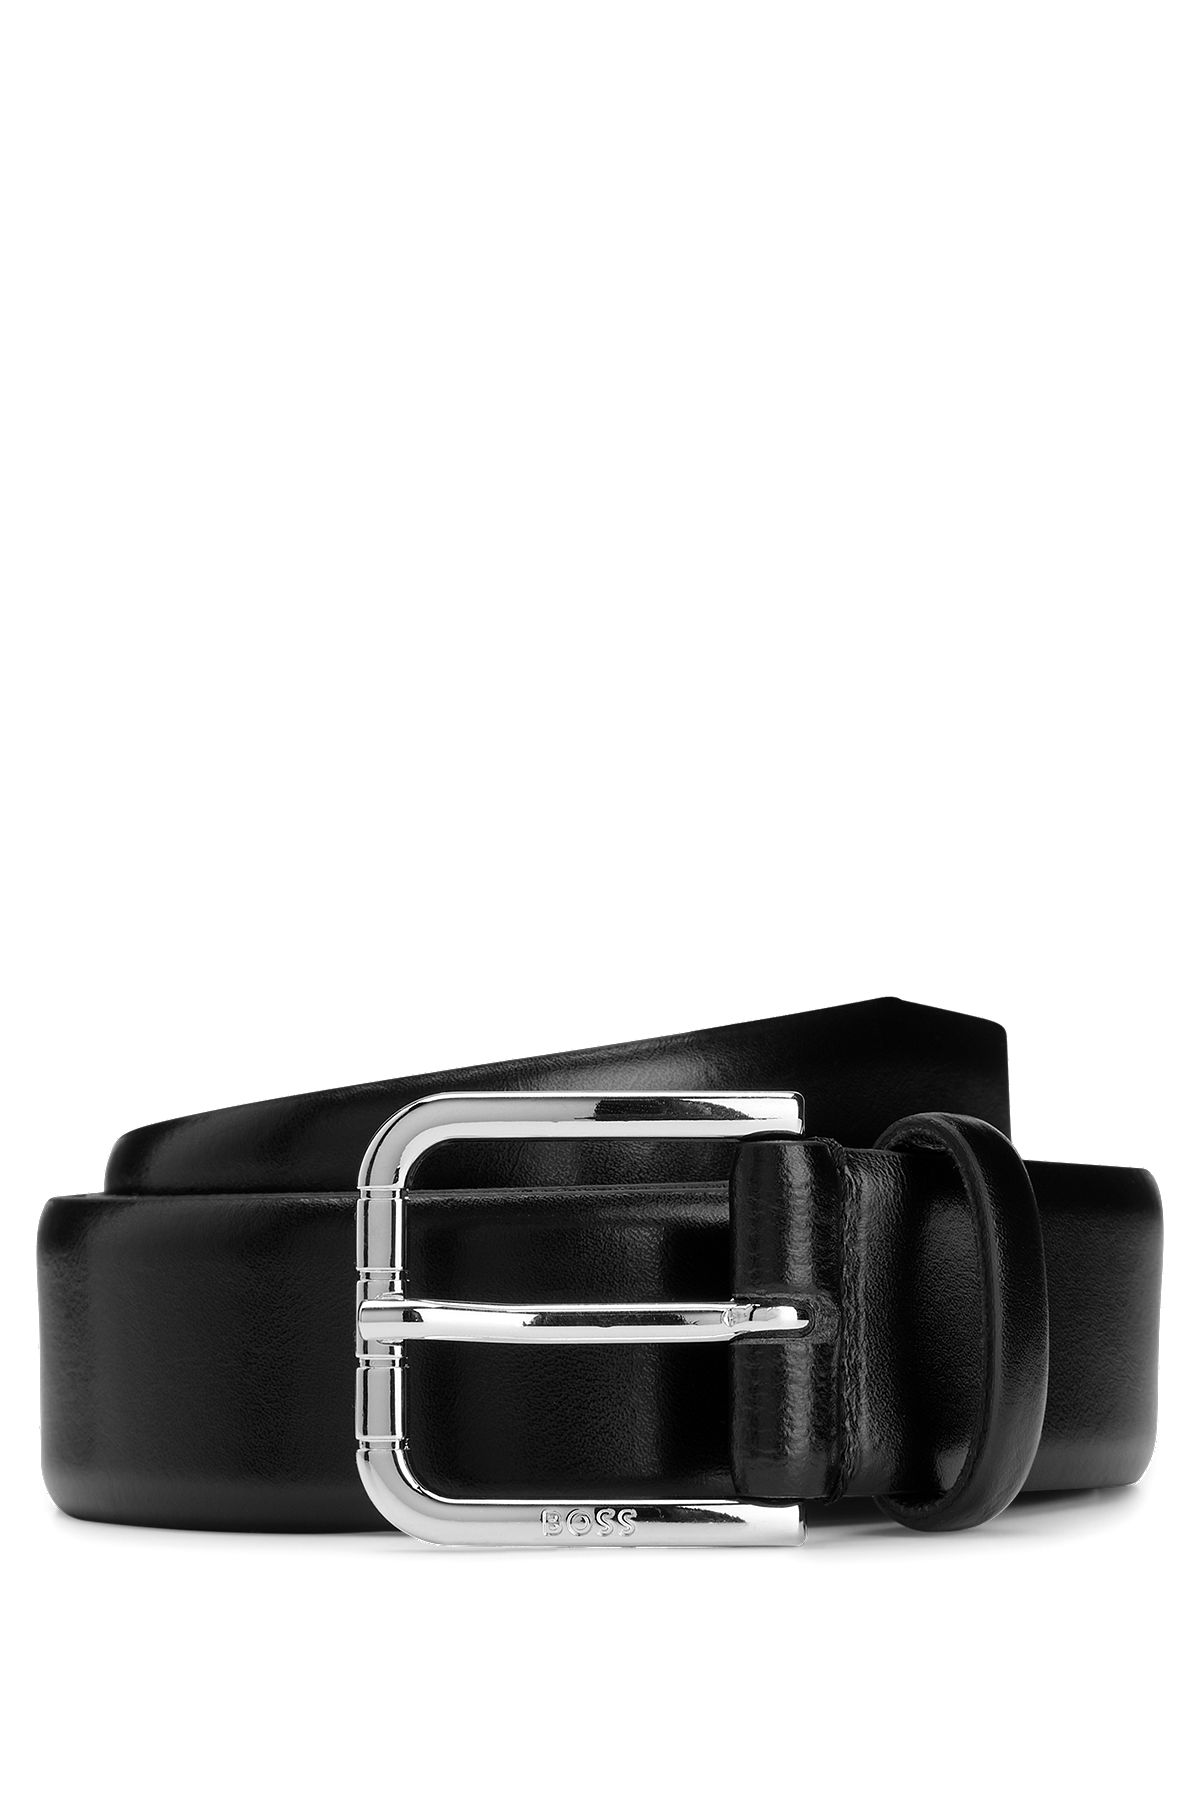 GALLERY SEVEN Mens Ratchet Belts Leather - Automatic Buckle - Men Dress Belt  - Black- Modern Business - Adjustable from 28 to 44 waist at  Men's  Clothing store